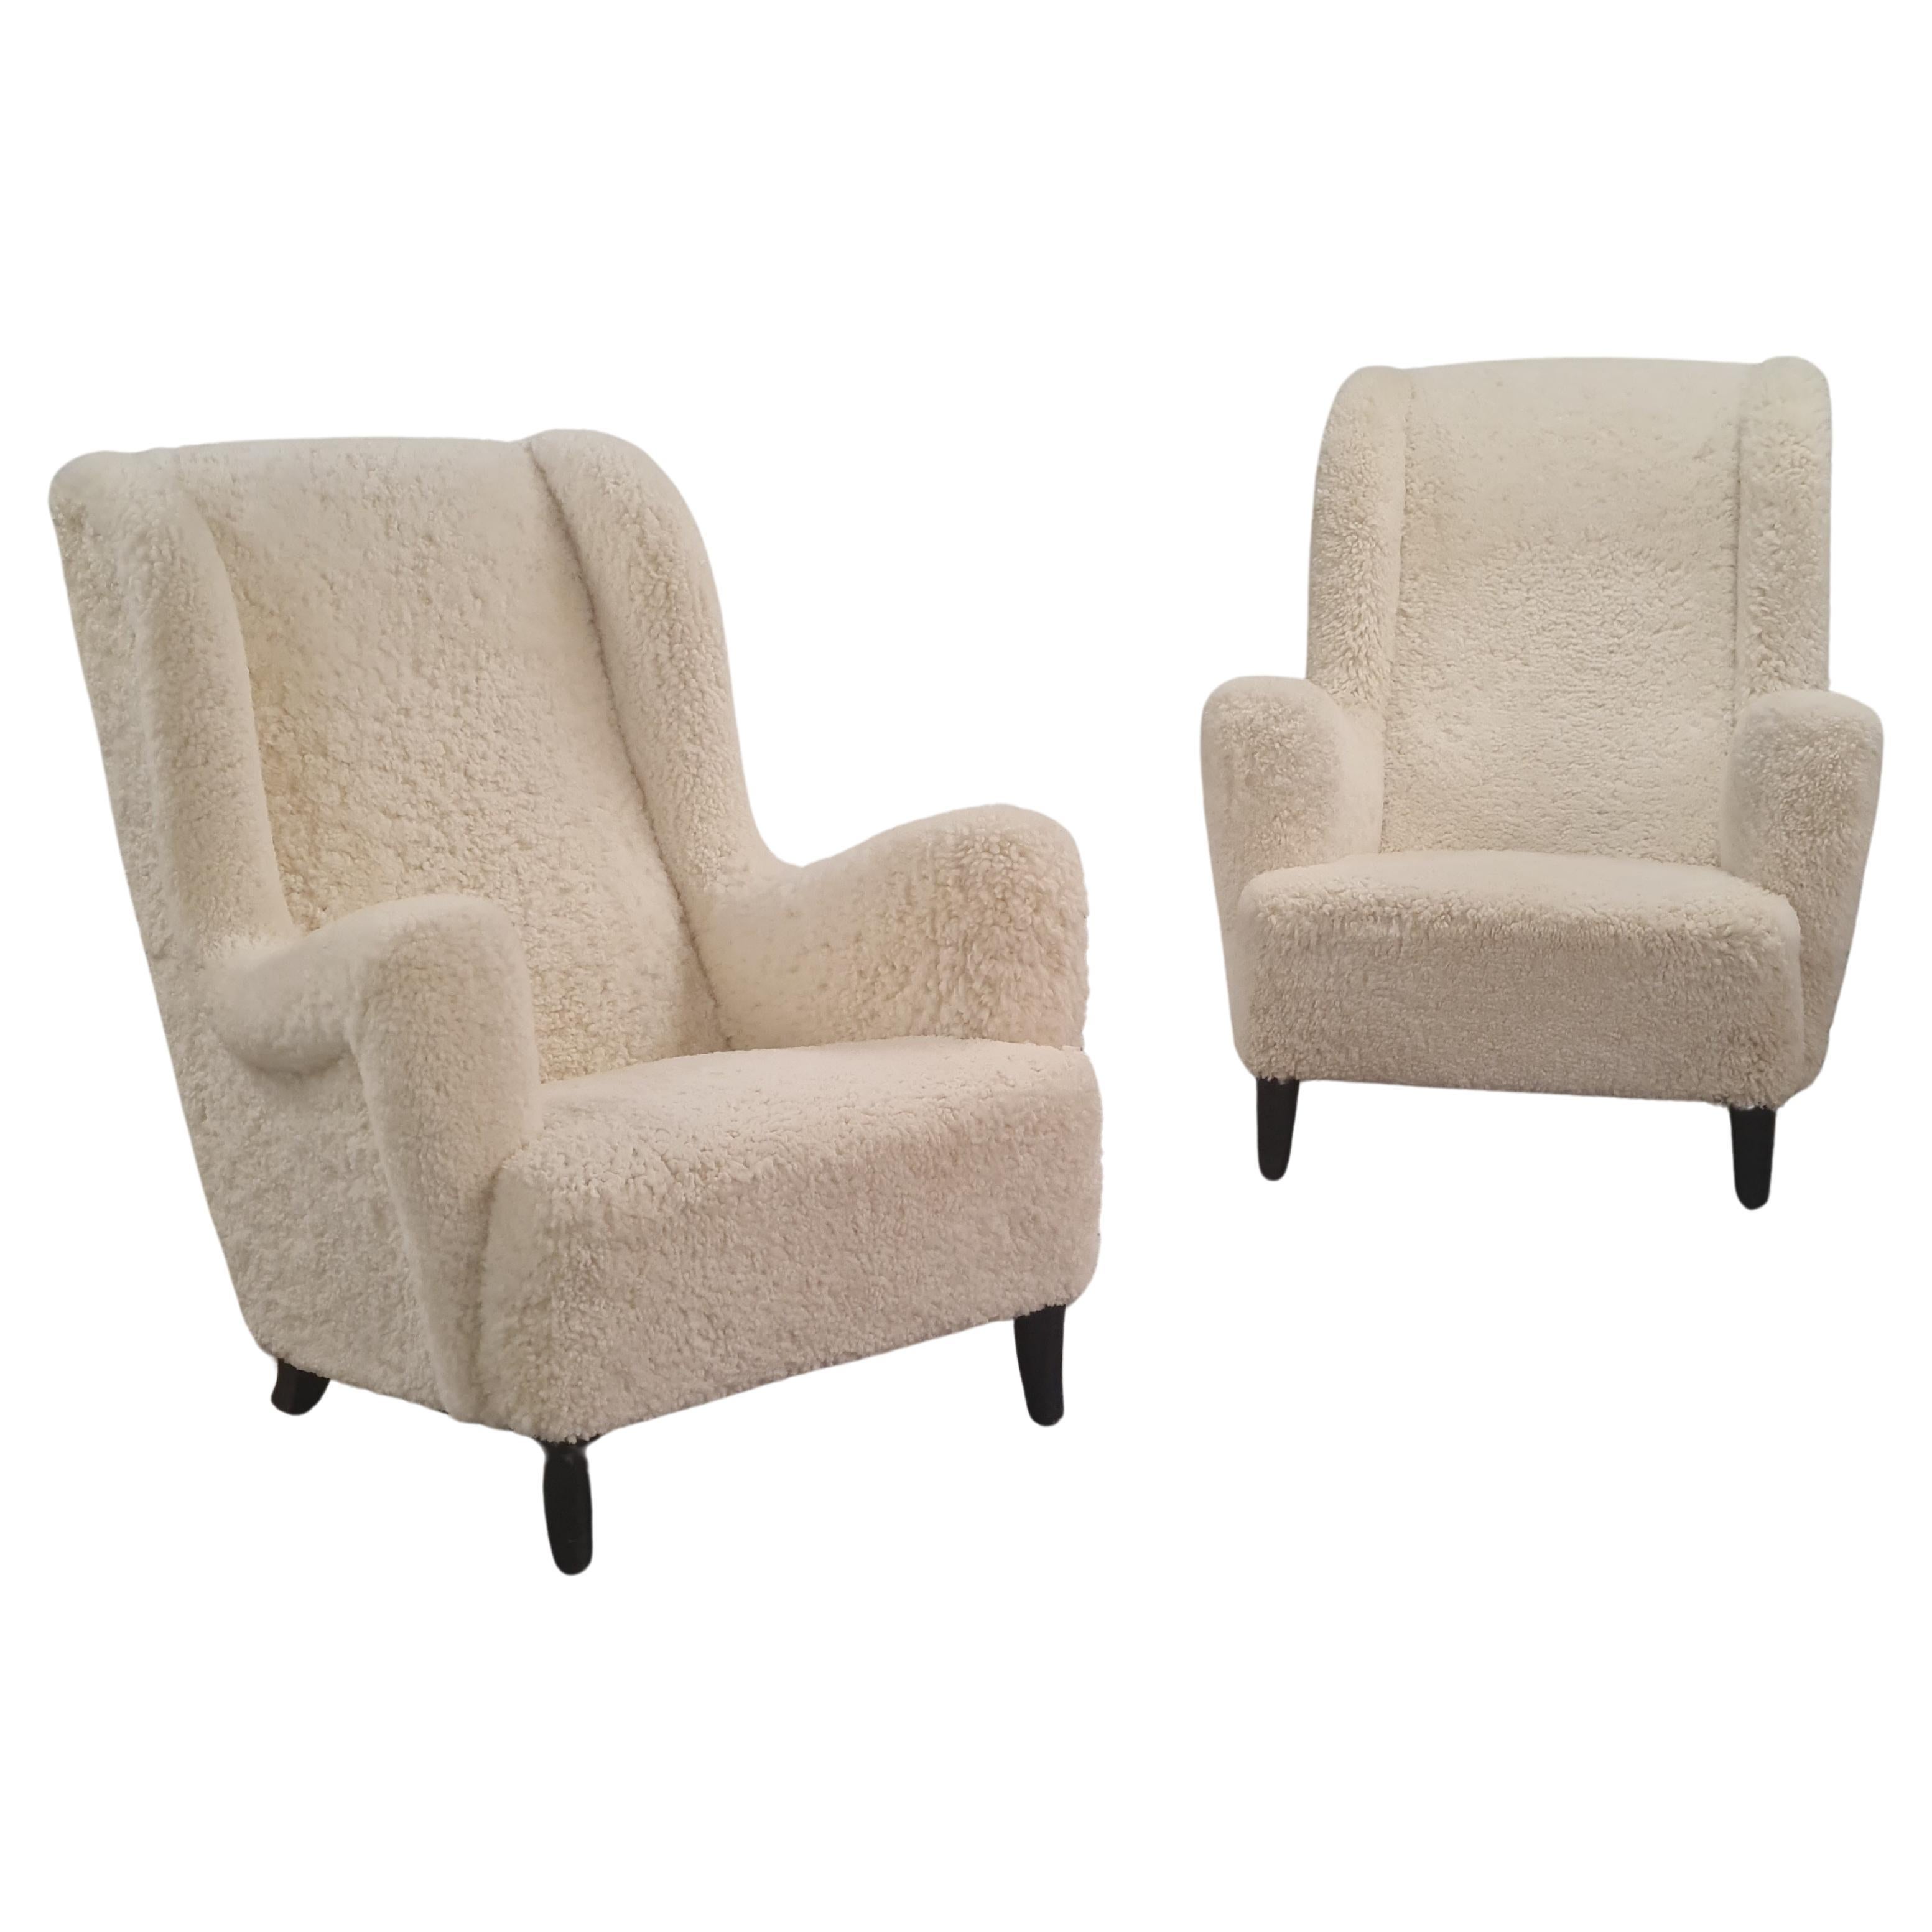 A beautiful and sizable pair of 1940s armchairs. These are heavy weight yet unbelievably comfortable pair of chairs. So comfortable that the decision to put them on sale wasn't an easy one. 
Even though from the 1940s, the chairs have modern sleek